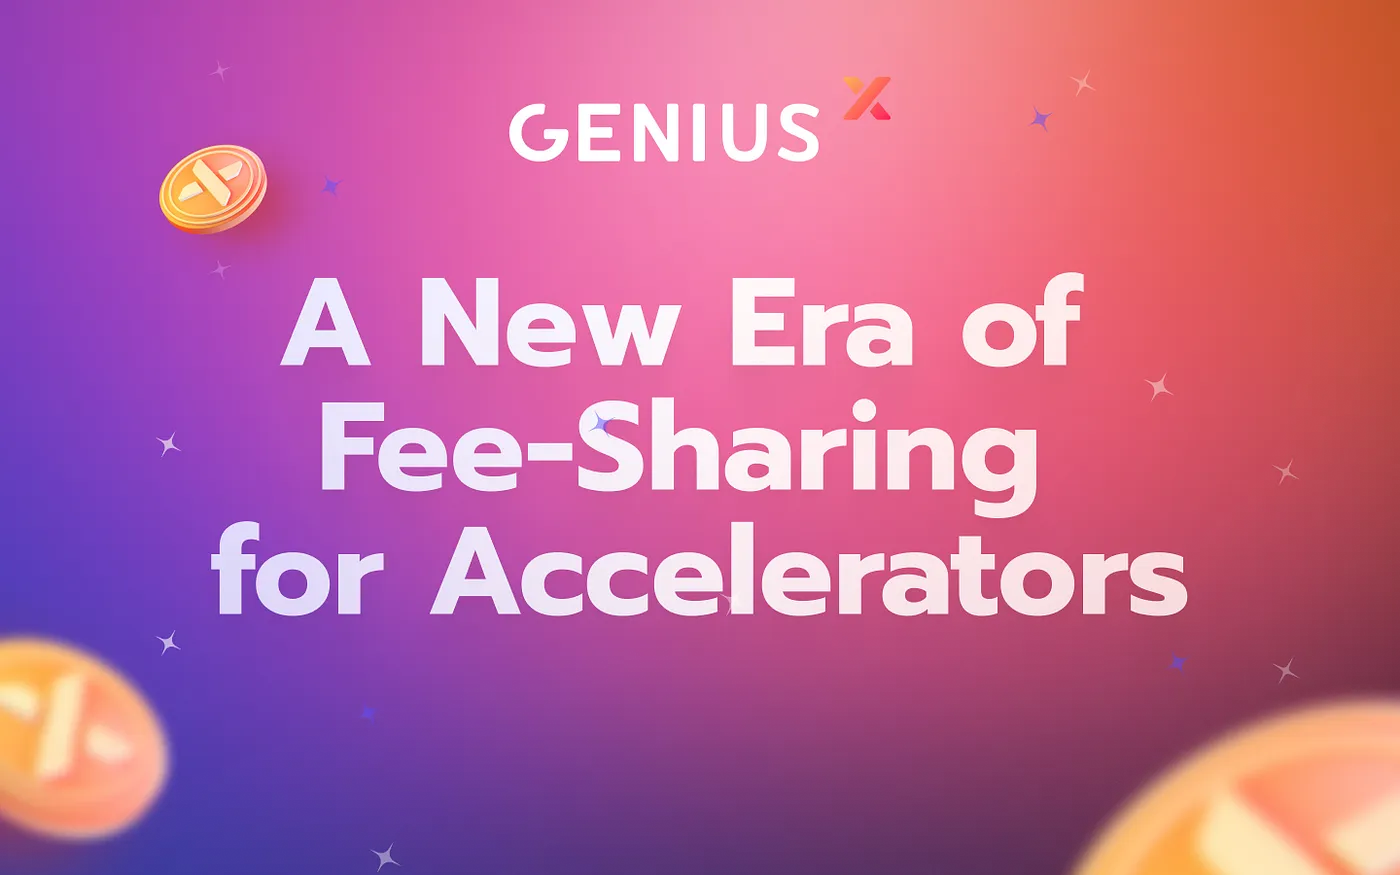 A New Era of Fee-Sharing for Accelerators!